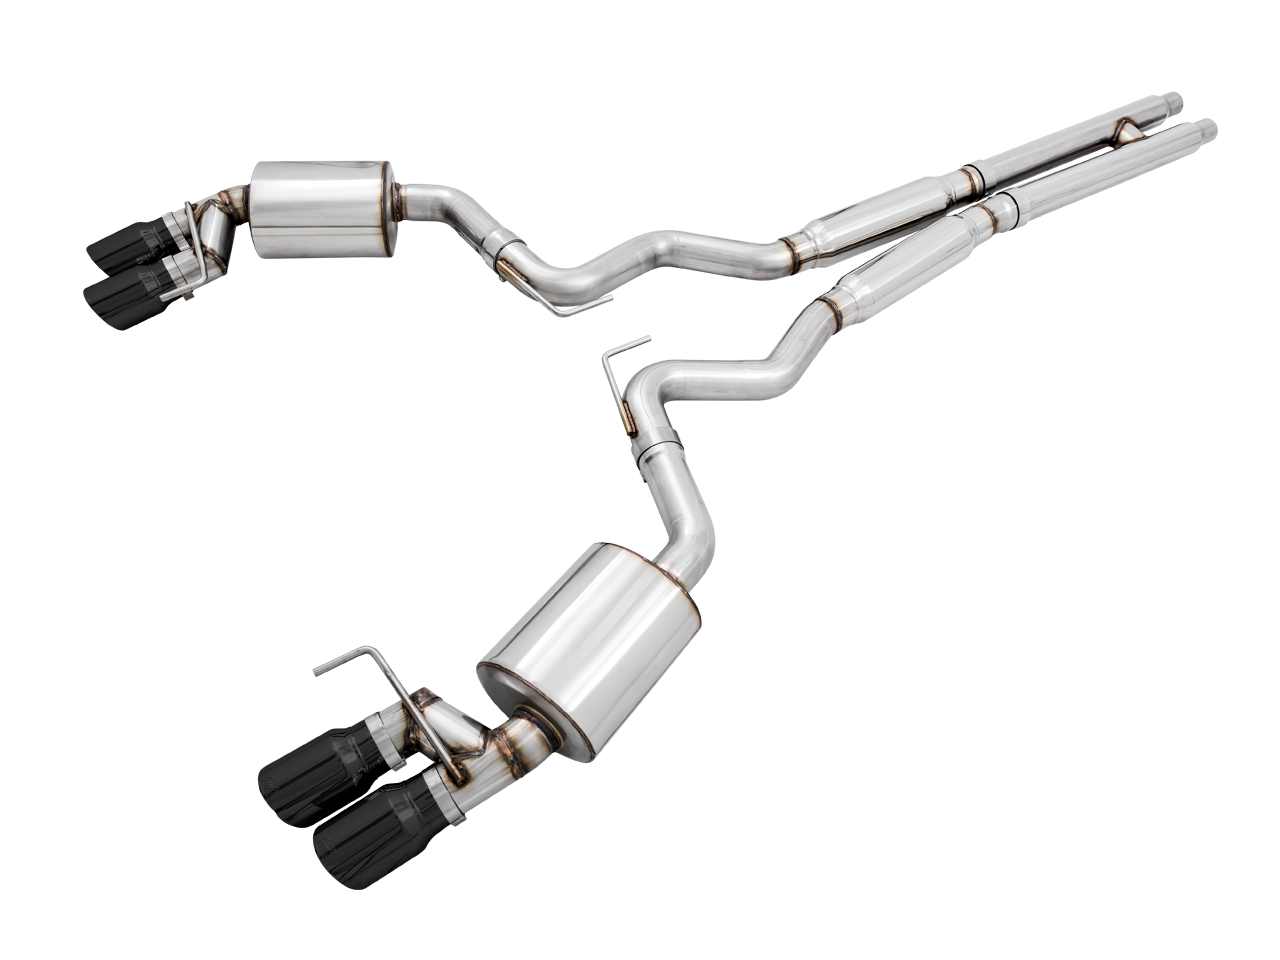 AWE Touring Edition Cat-back Exhaust for the 2018+ Mustang GT - Quad Diamond Black Tips